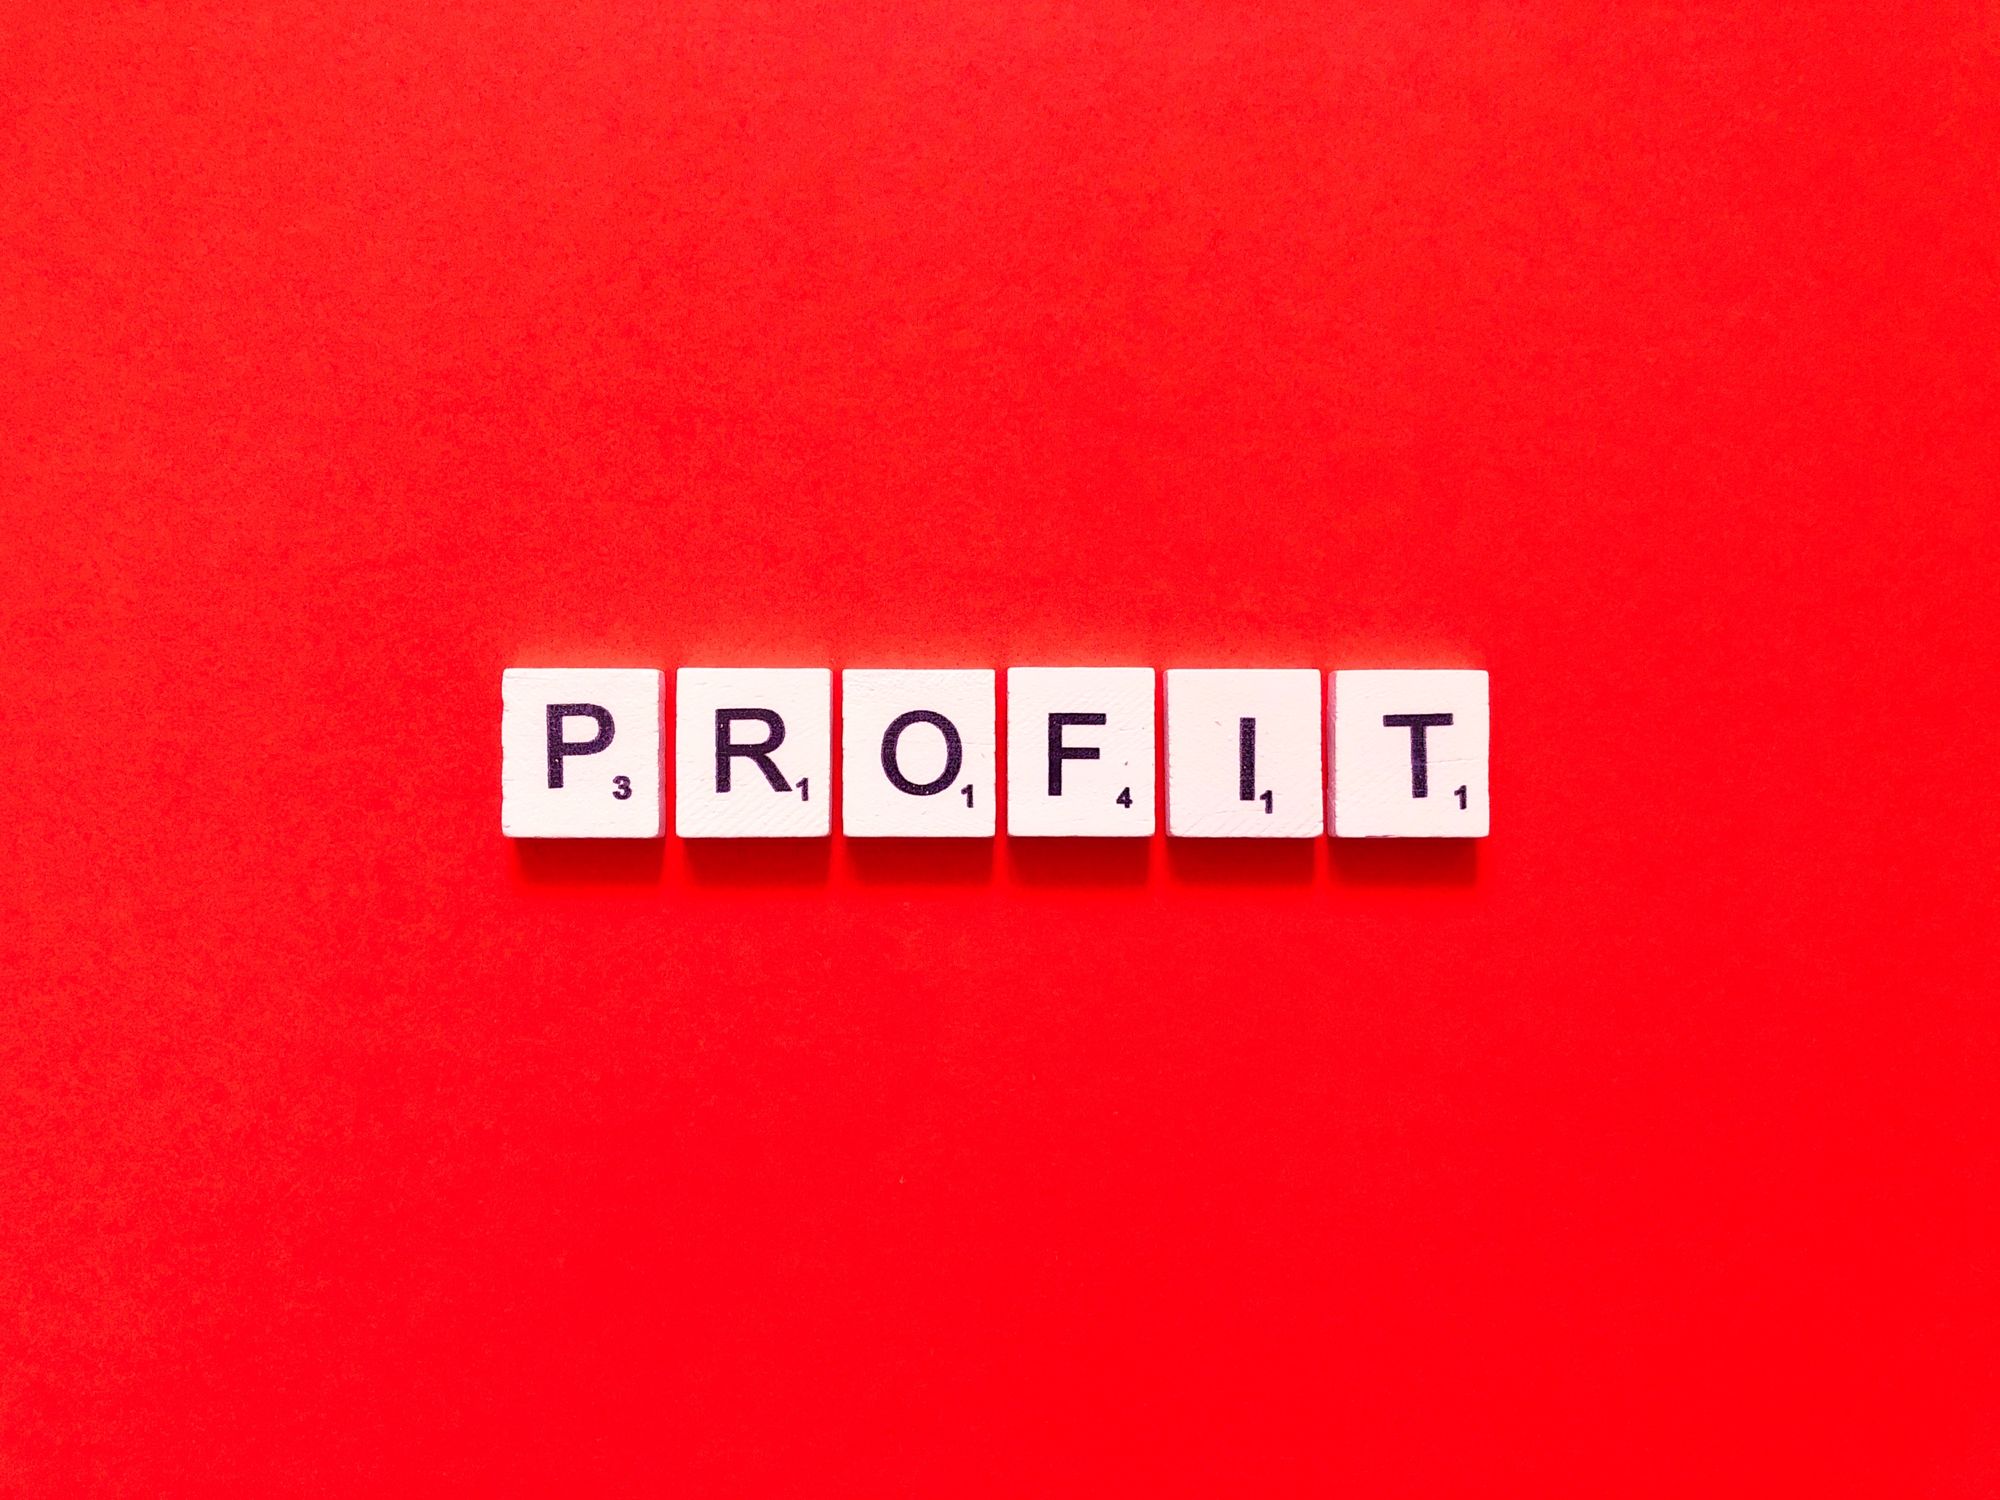 Finding the right Airbnb profit calculator for your business.